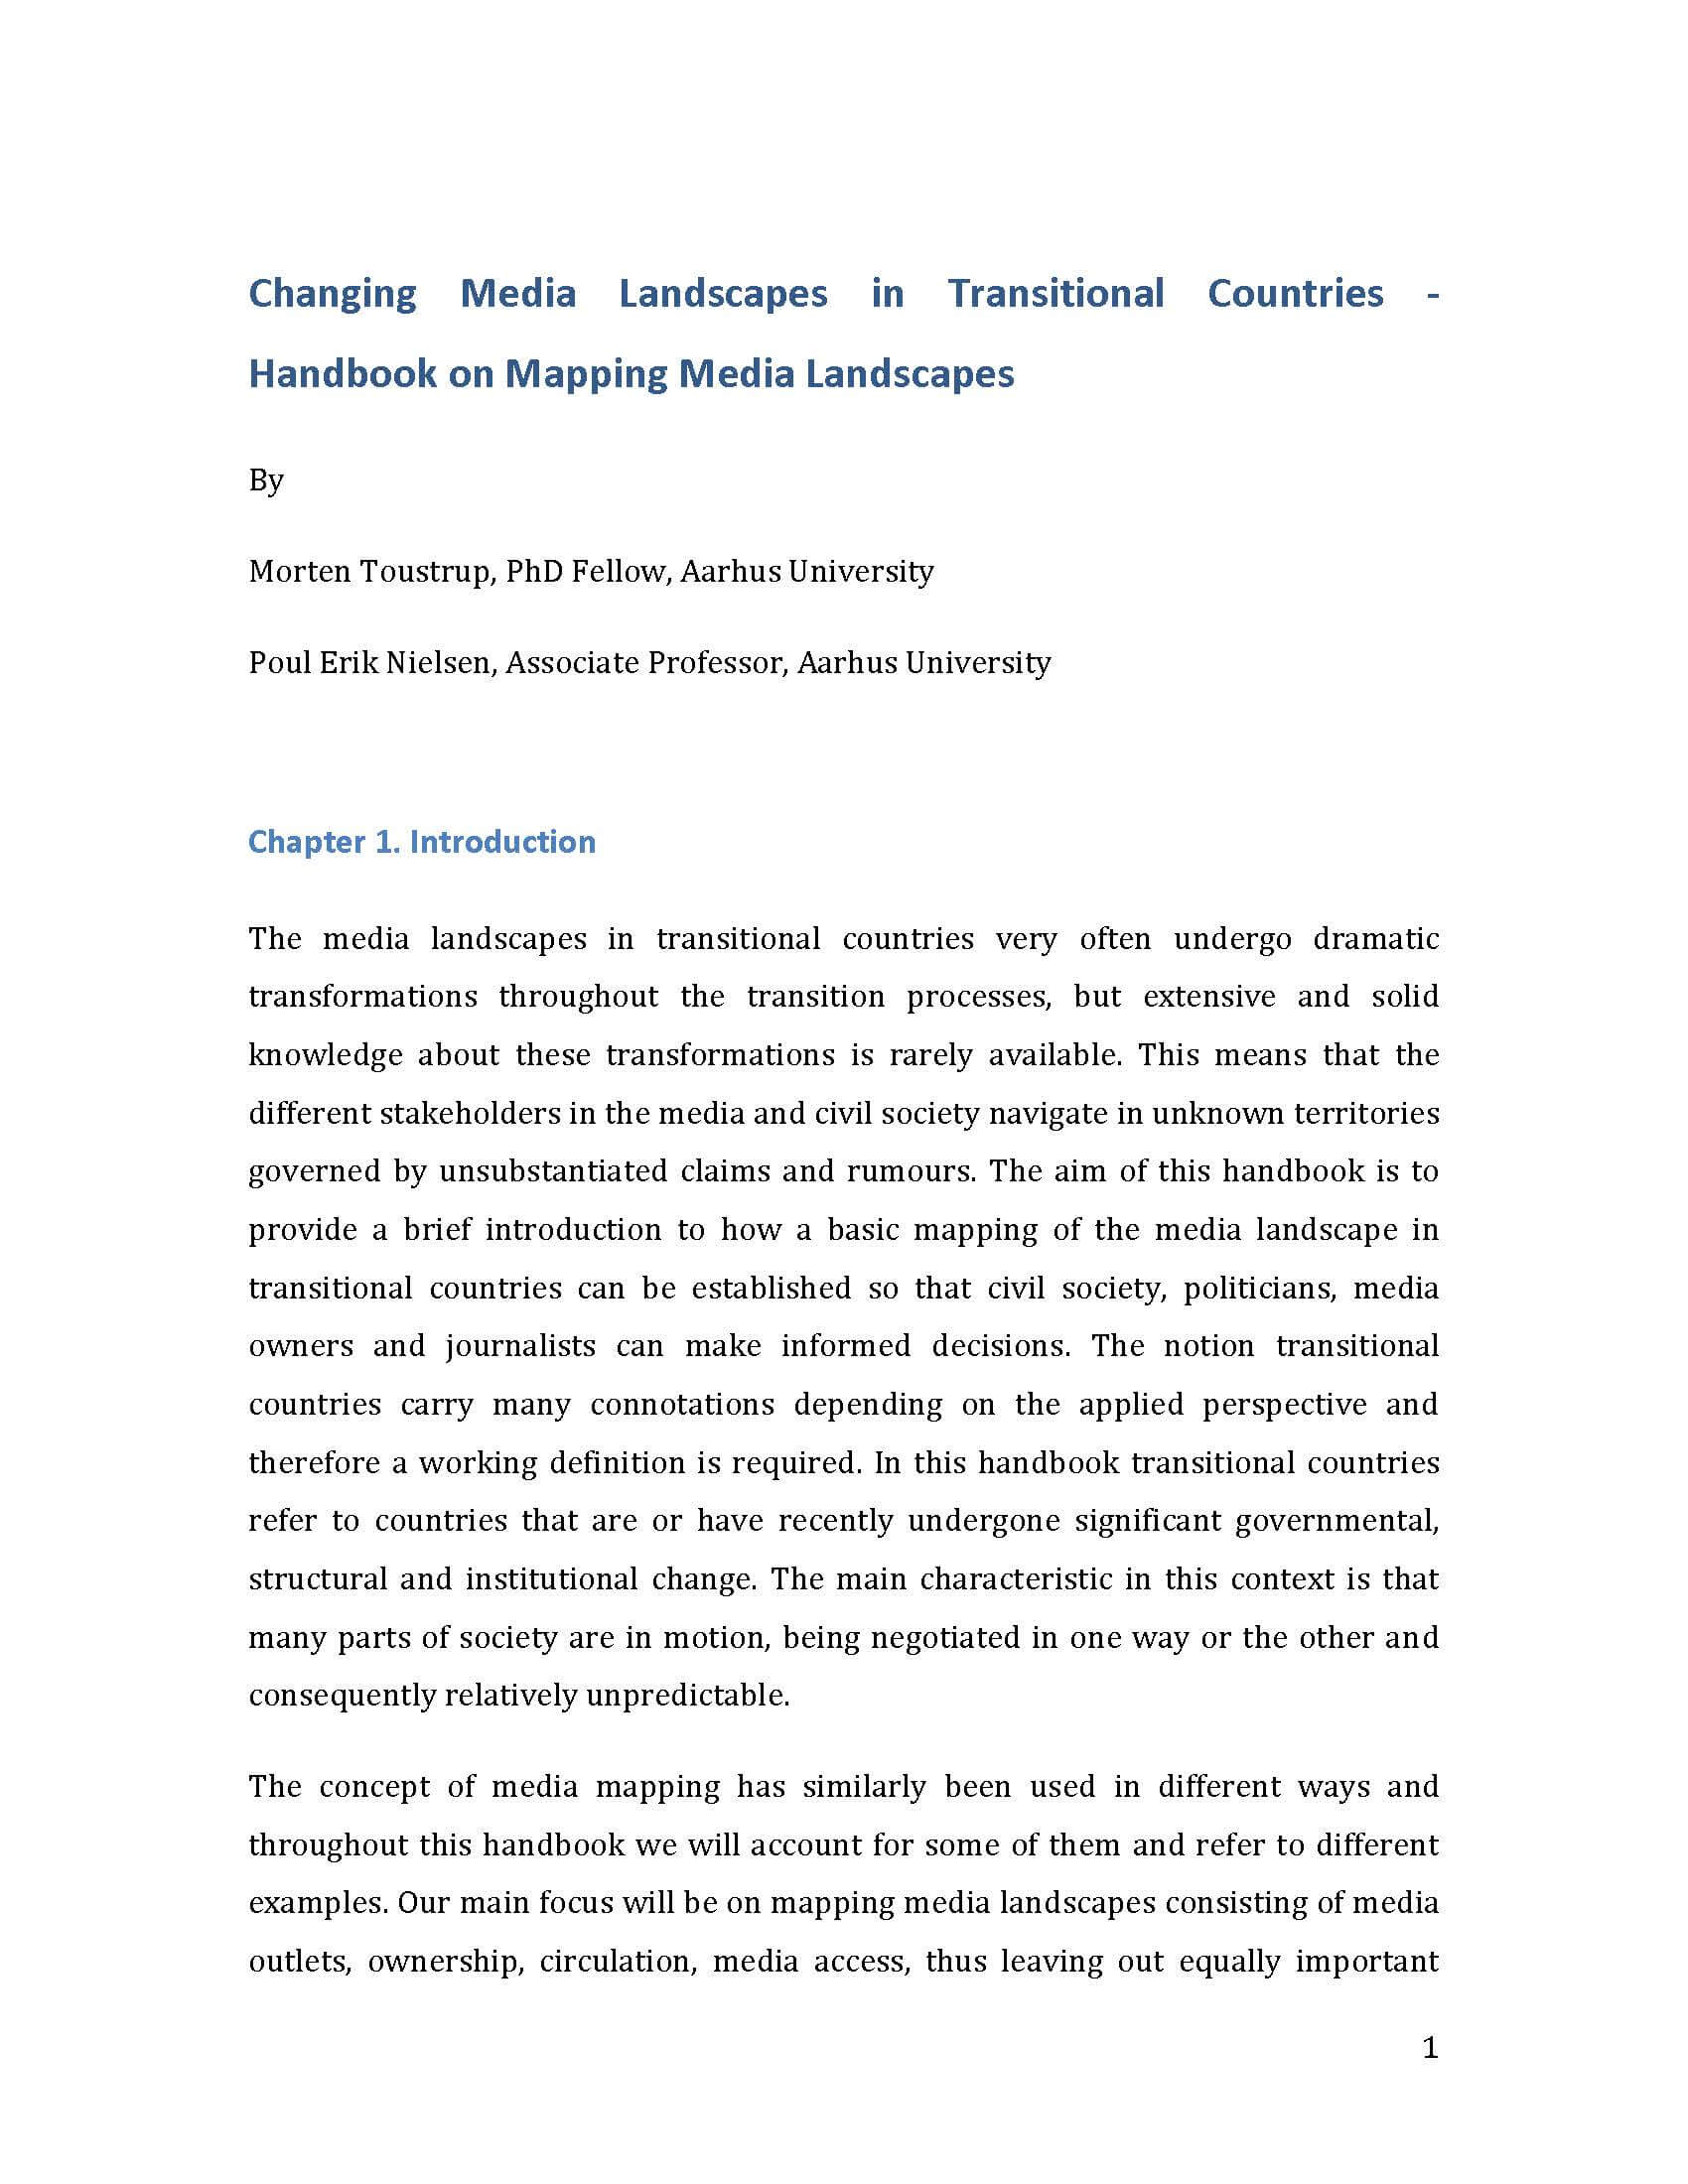 Changing media landscapes in transitional countries – handbook on mapping media landscapes